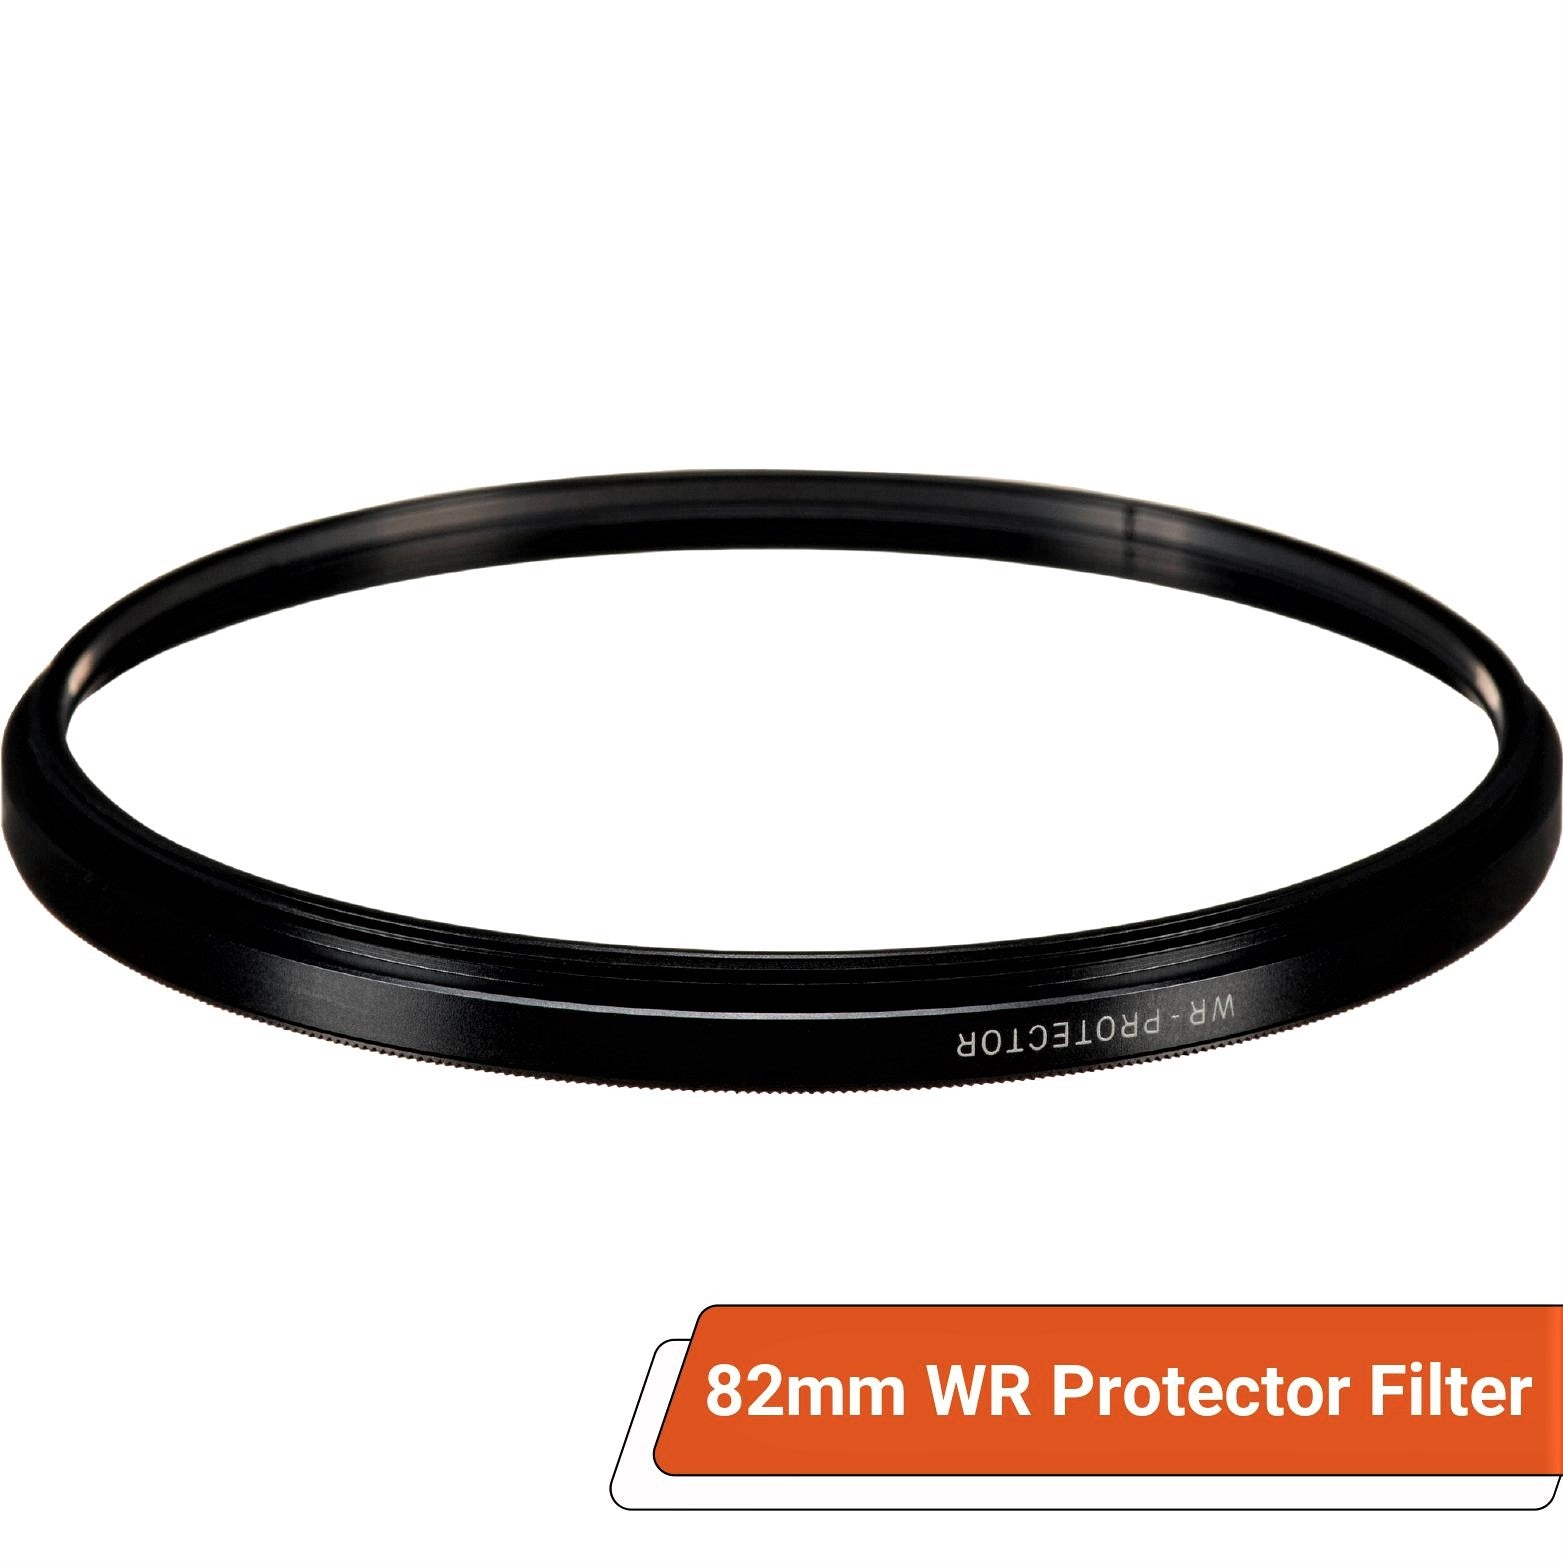 Sigma 82mm WR (Water Repellent) Protector Filter